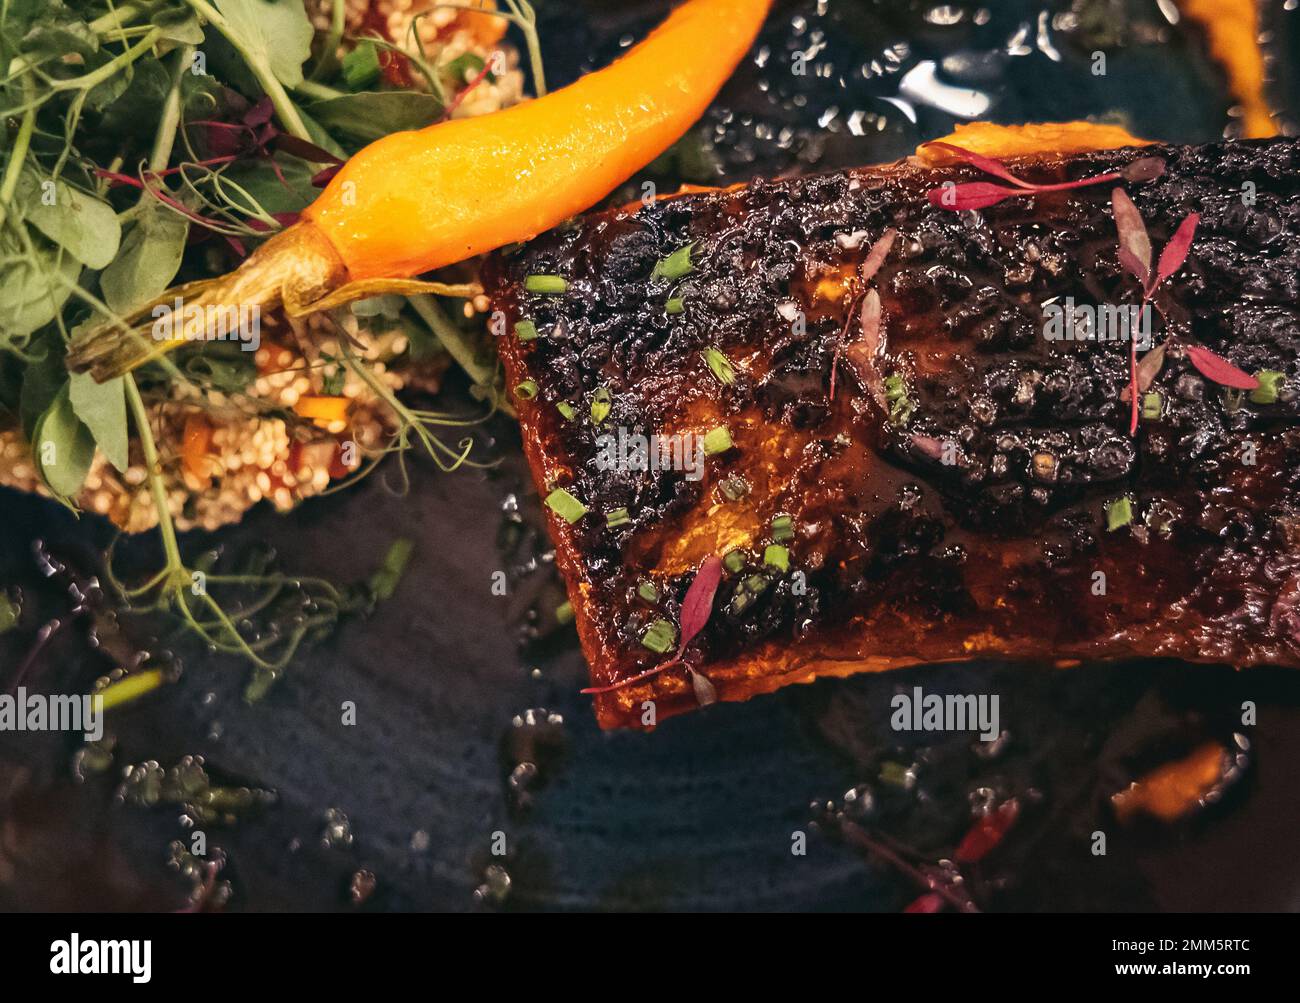 Grill glazed salmon fillet with quinoa salad in Cyprus island country Stock Photo